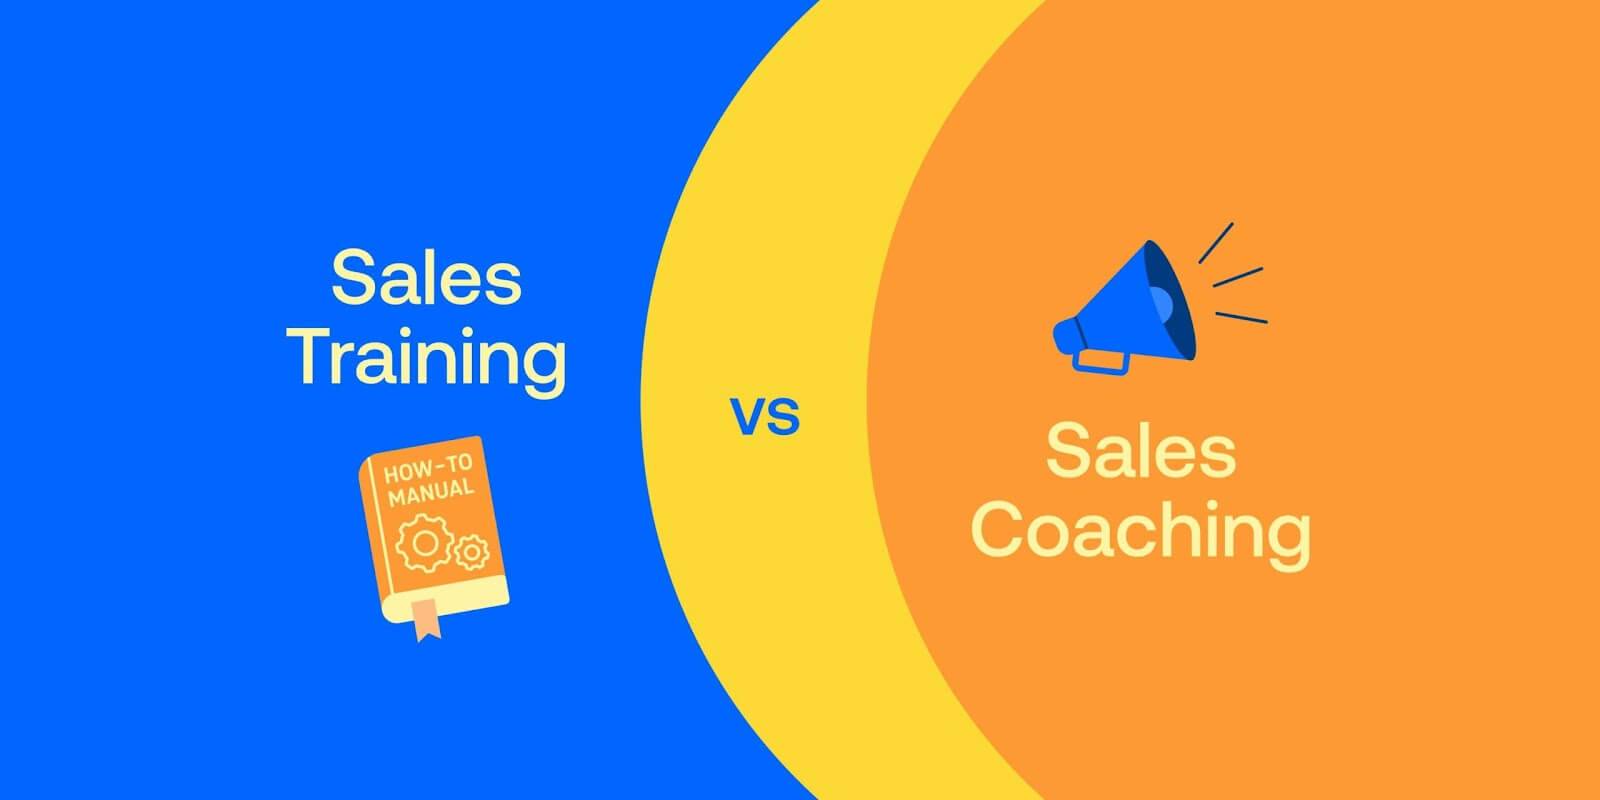 10. Equipping leaders with effective tactics for sales performance improvement